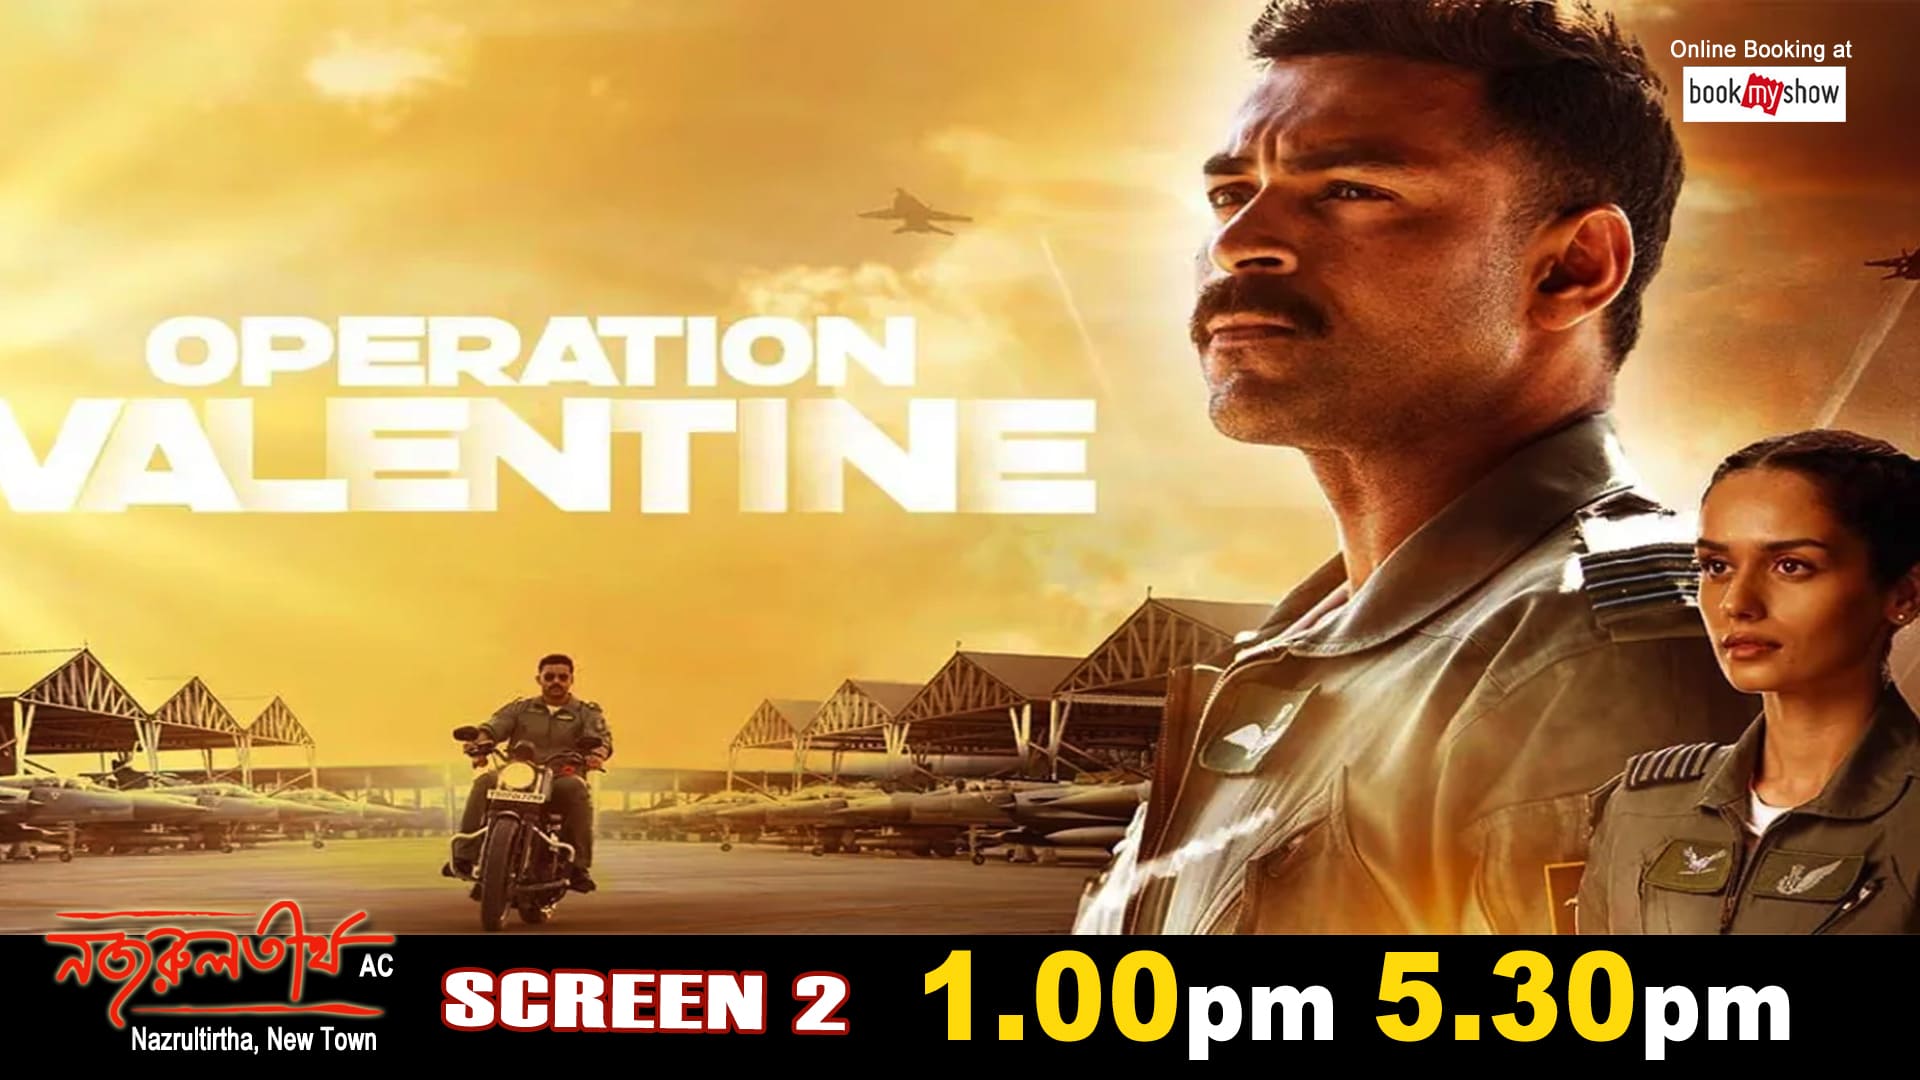 http://nazrultirtha.co.in/upload_file/upcoming_events/OPERATION VALENTINE (Hindi)